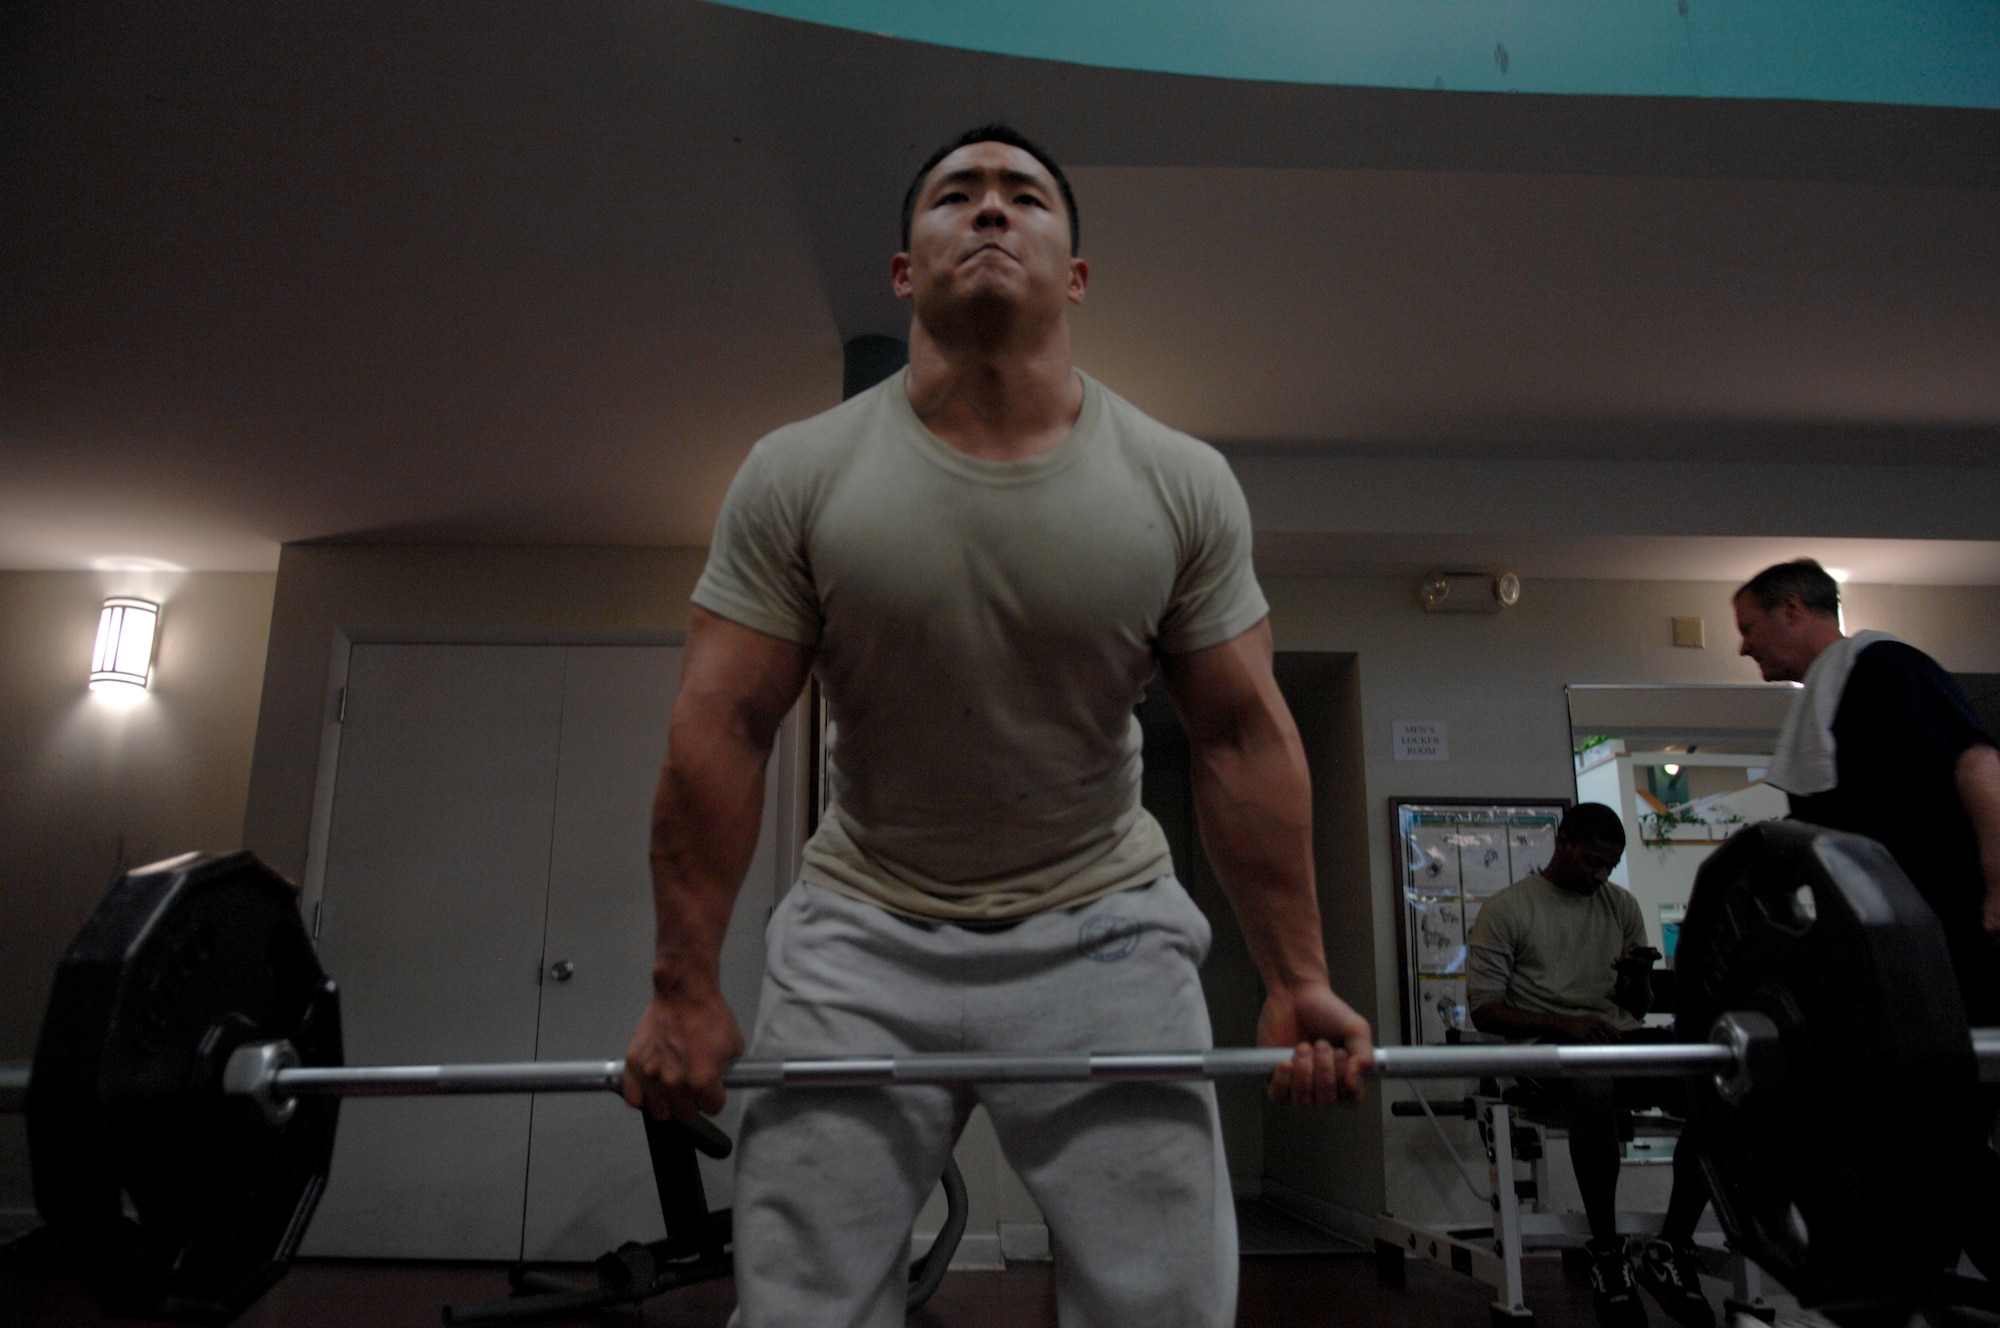 SCOTT AIR FORCE BASE, Ill. -- Senior Airman Henry Chung, 375th Logistics Readiness Squadron, works out Feb. 10 at Scott Air Force Base.  Airman Chung started working out after making a New Years resolution in 2007.(U.S. Air Force Photo by Senior Airman A,ber Kelly-Herard)